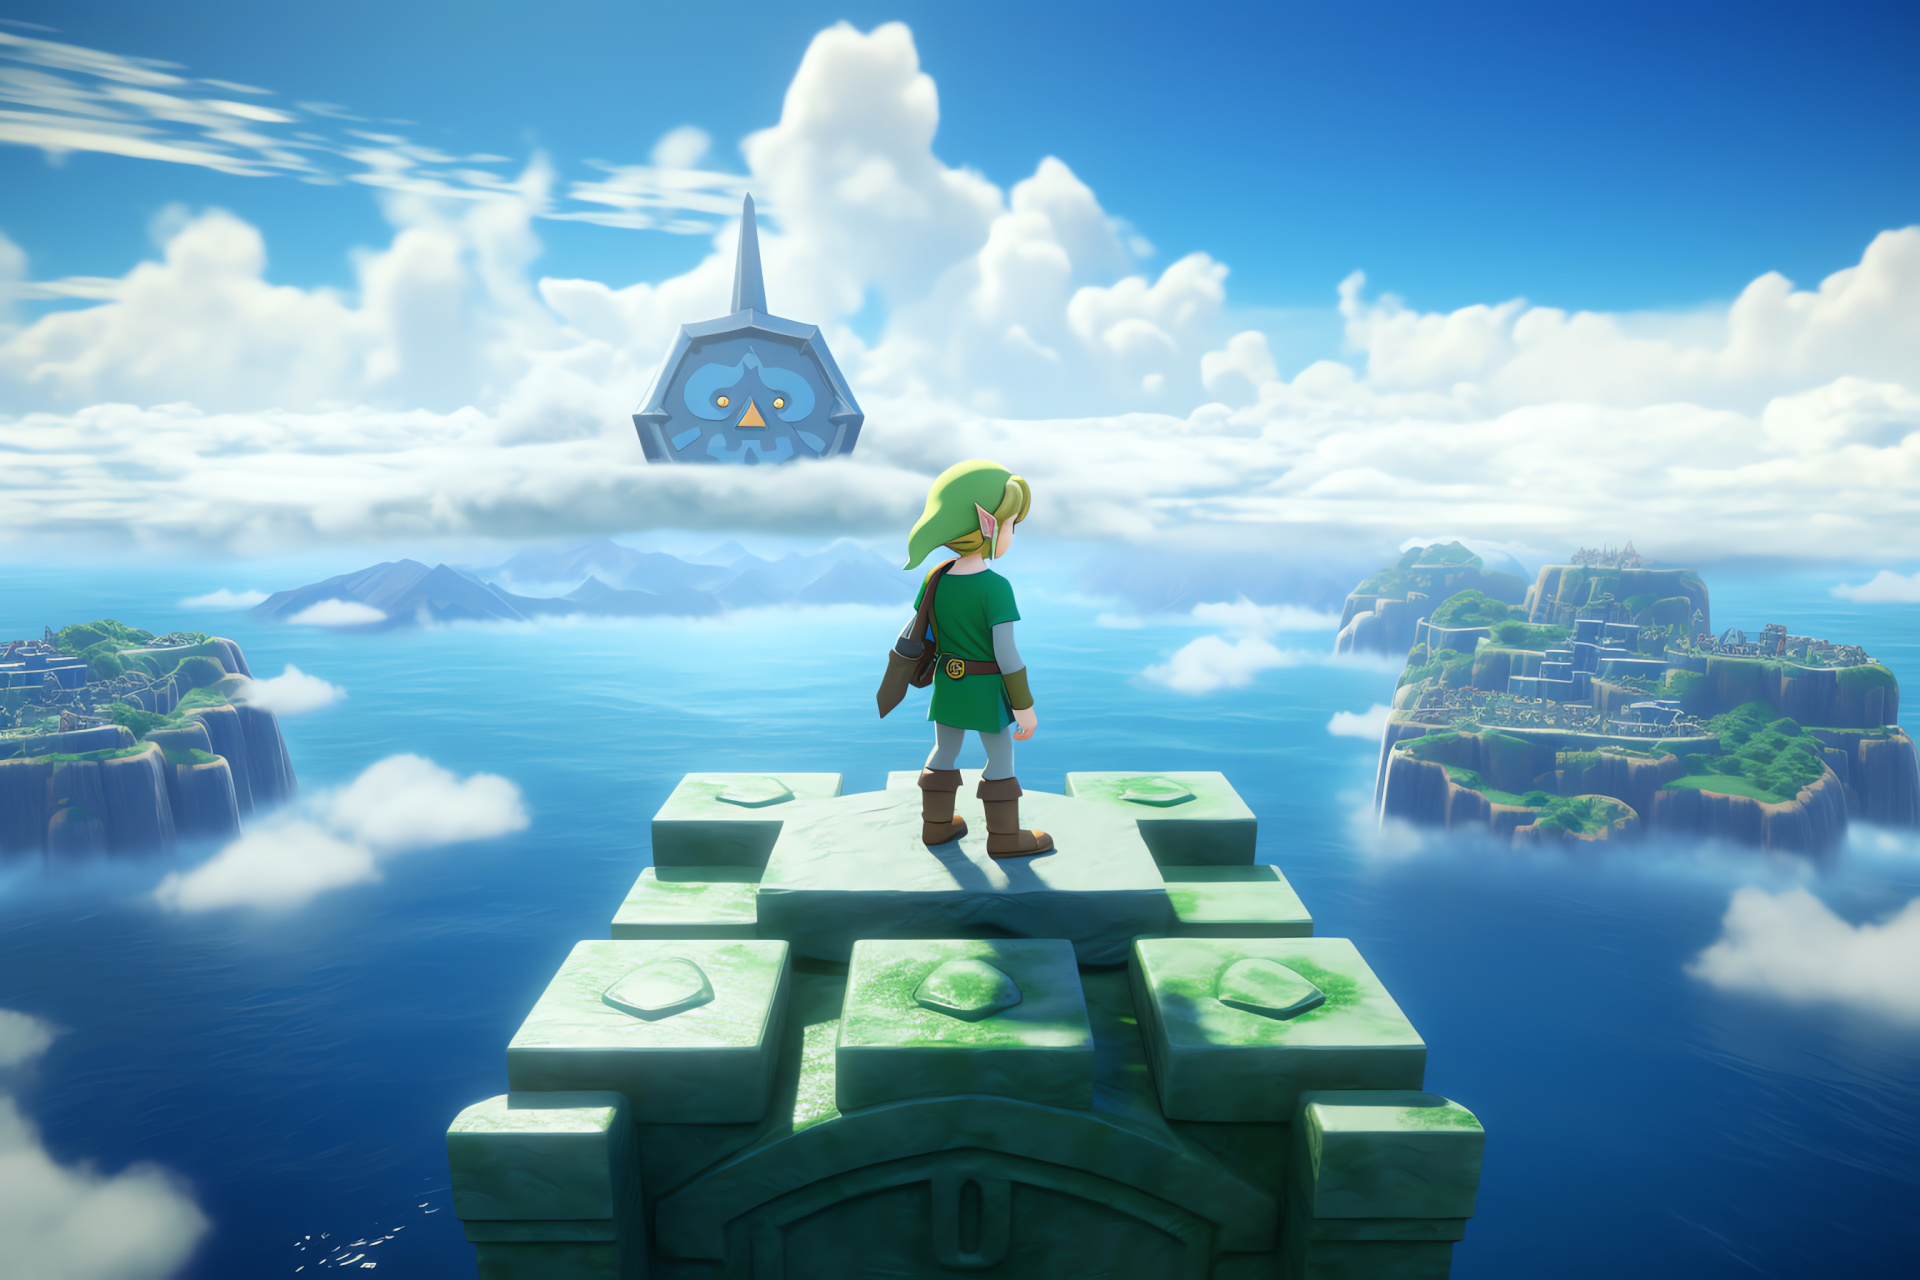 Toon Link character, Tower of the Gods location, Cel-shaded graphic style, Sea-faring adventures, Legendary hero depiction, HD Desktop Image